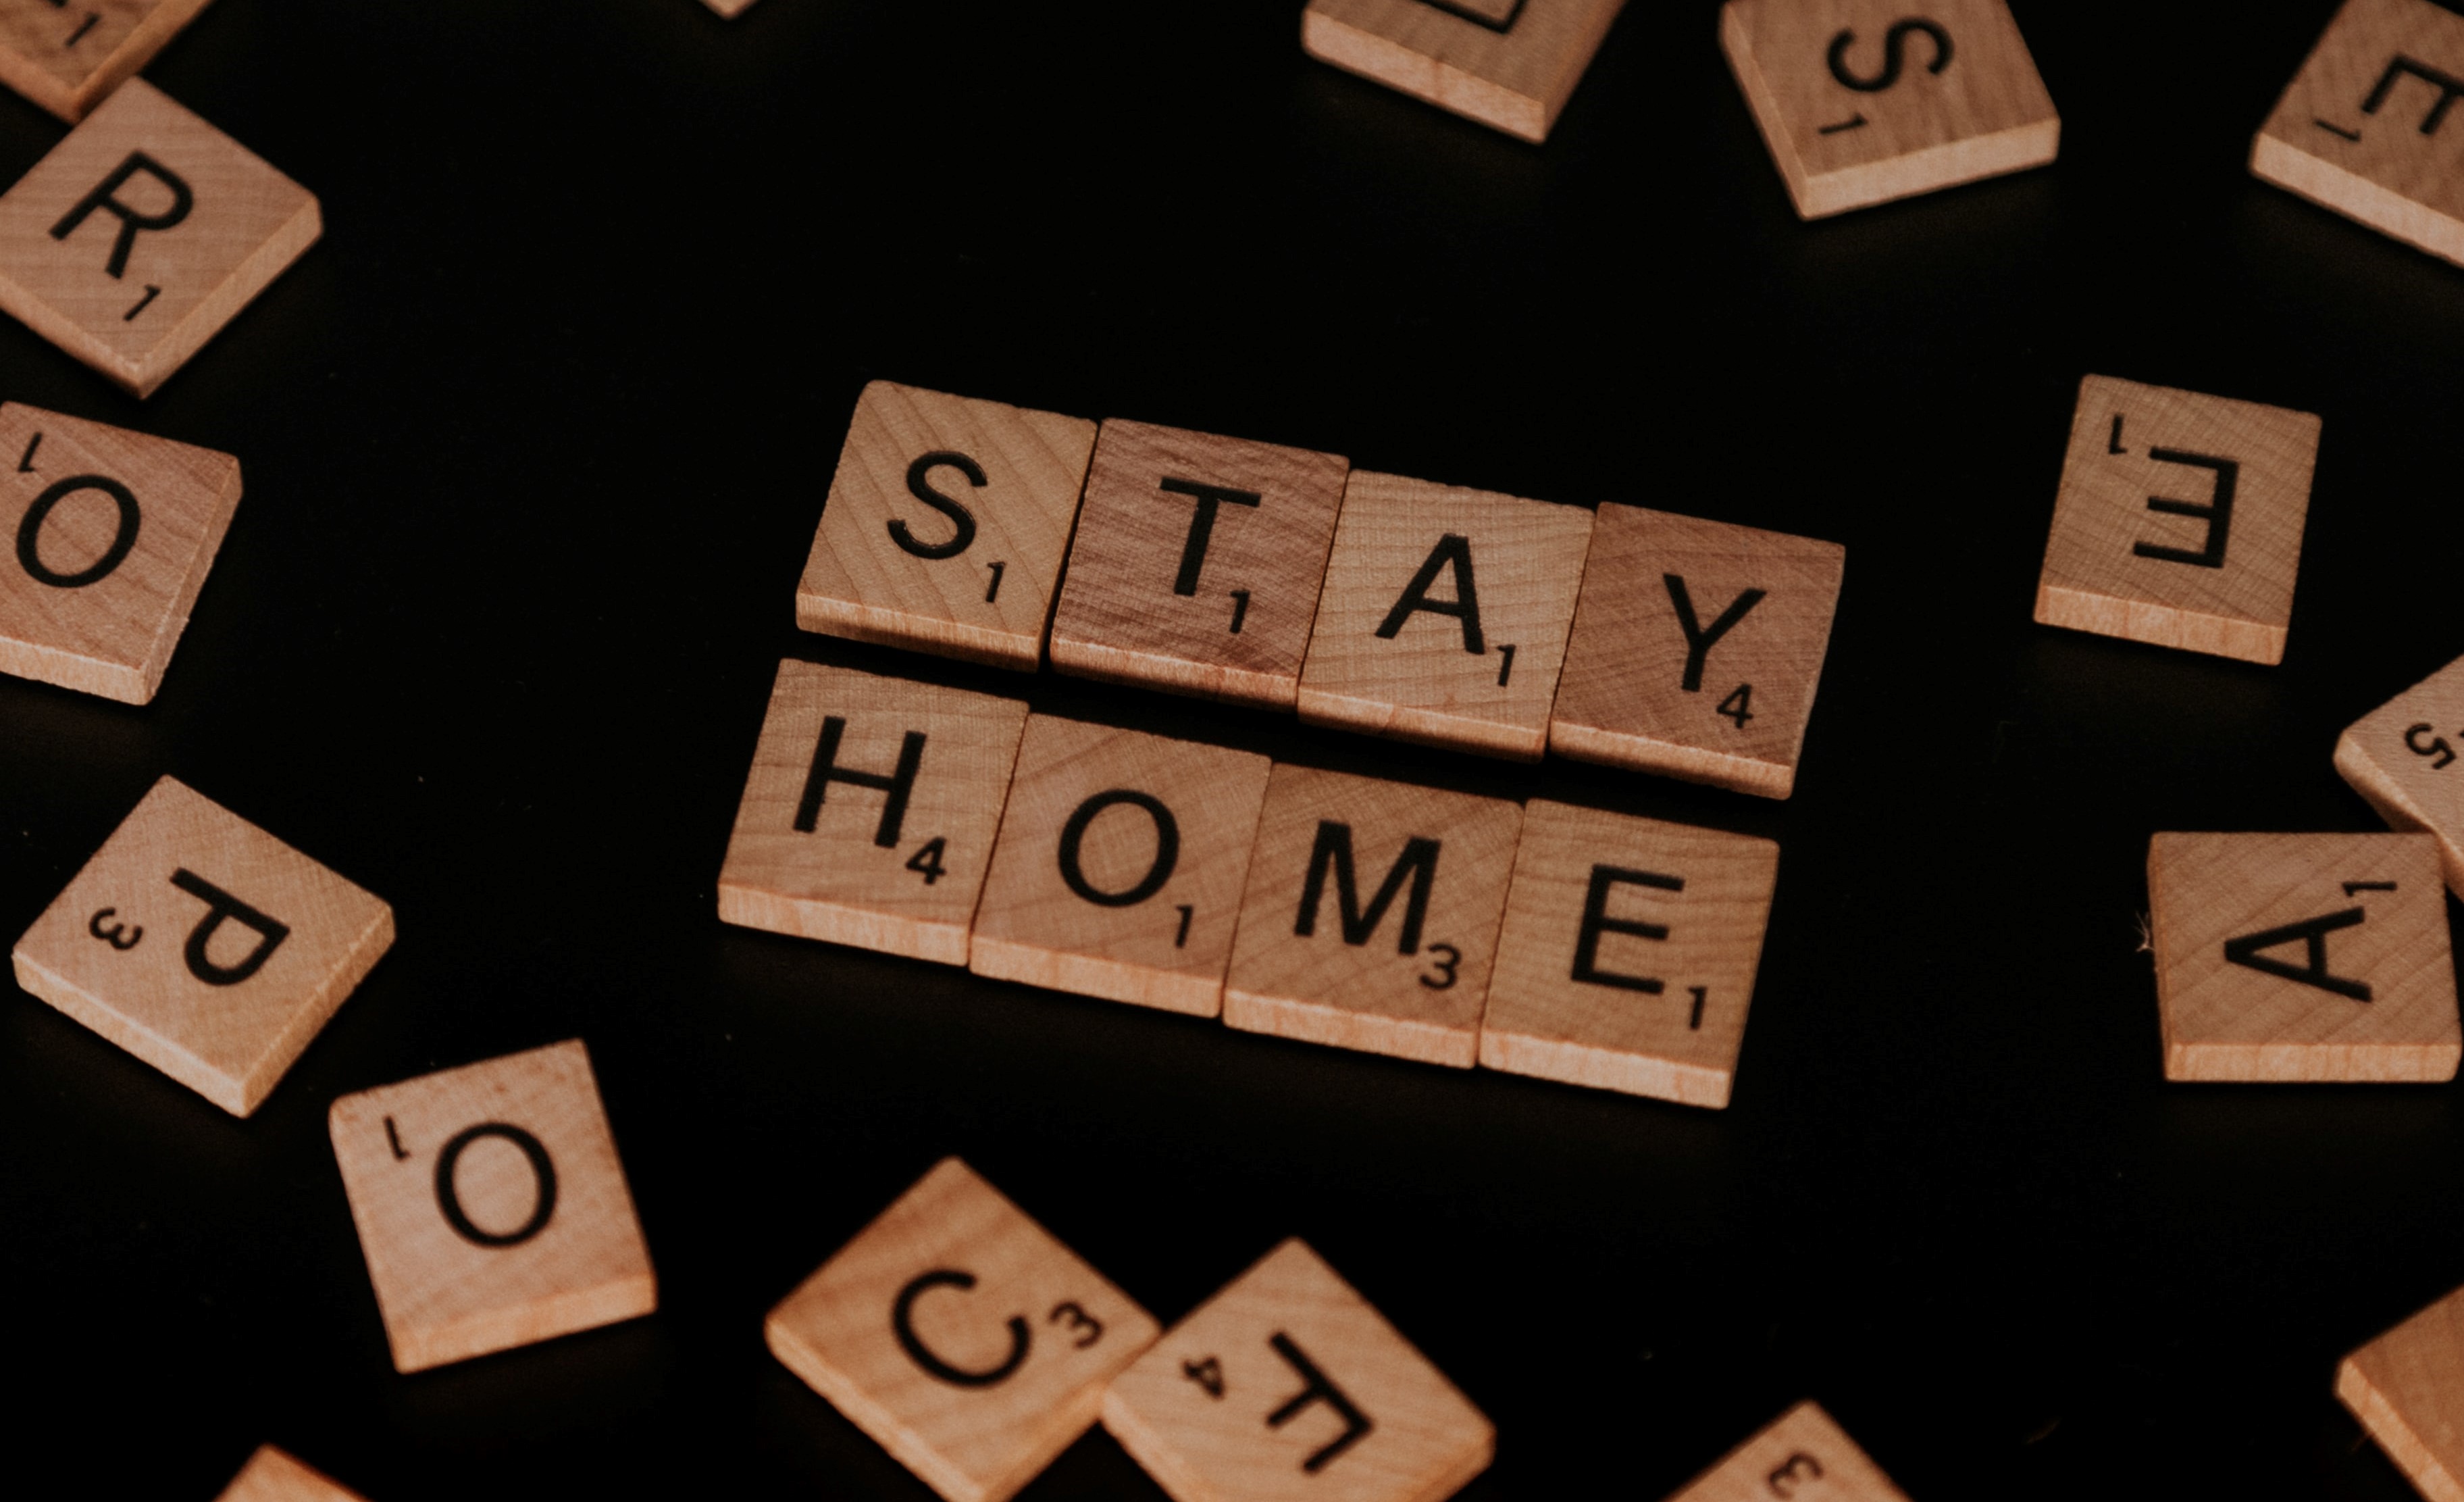 Stay Home